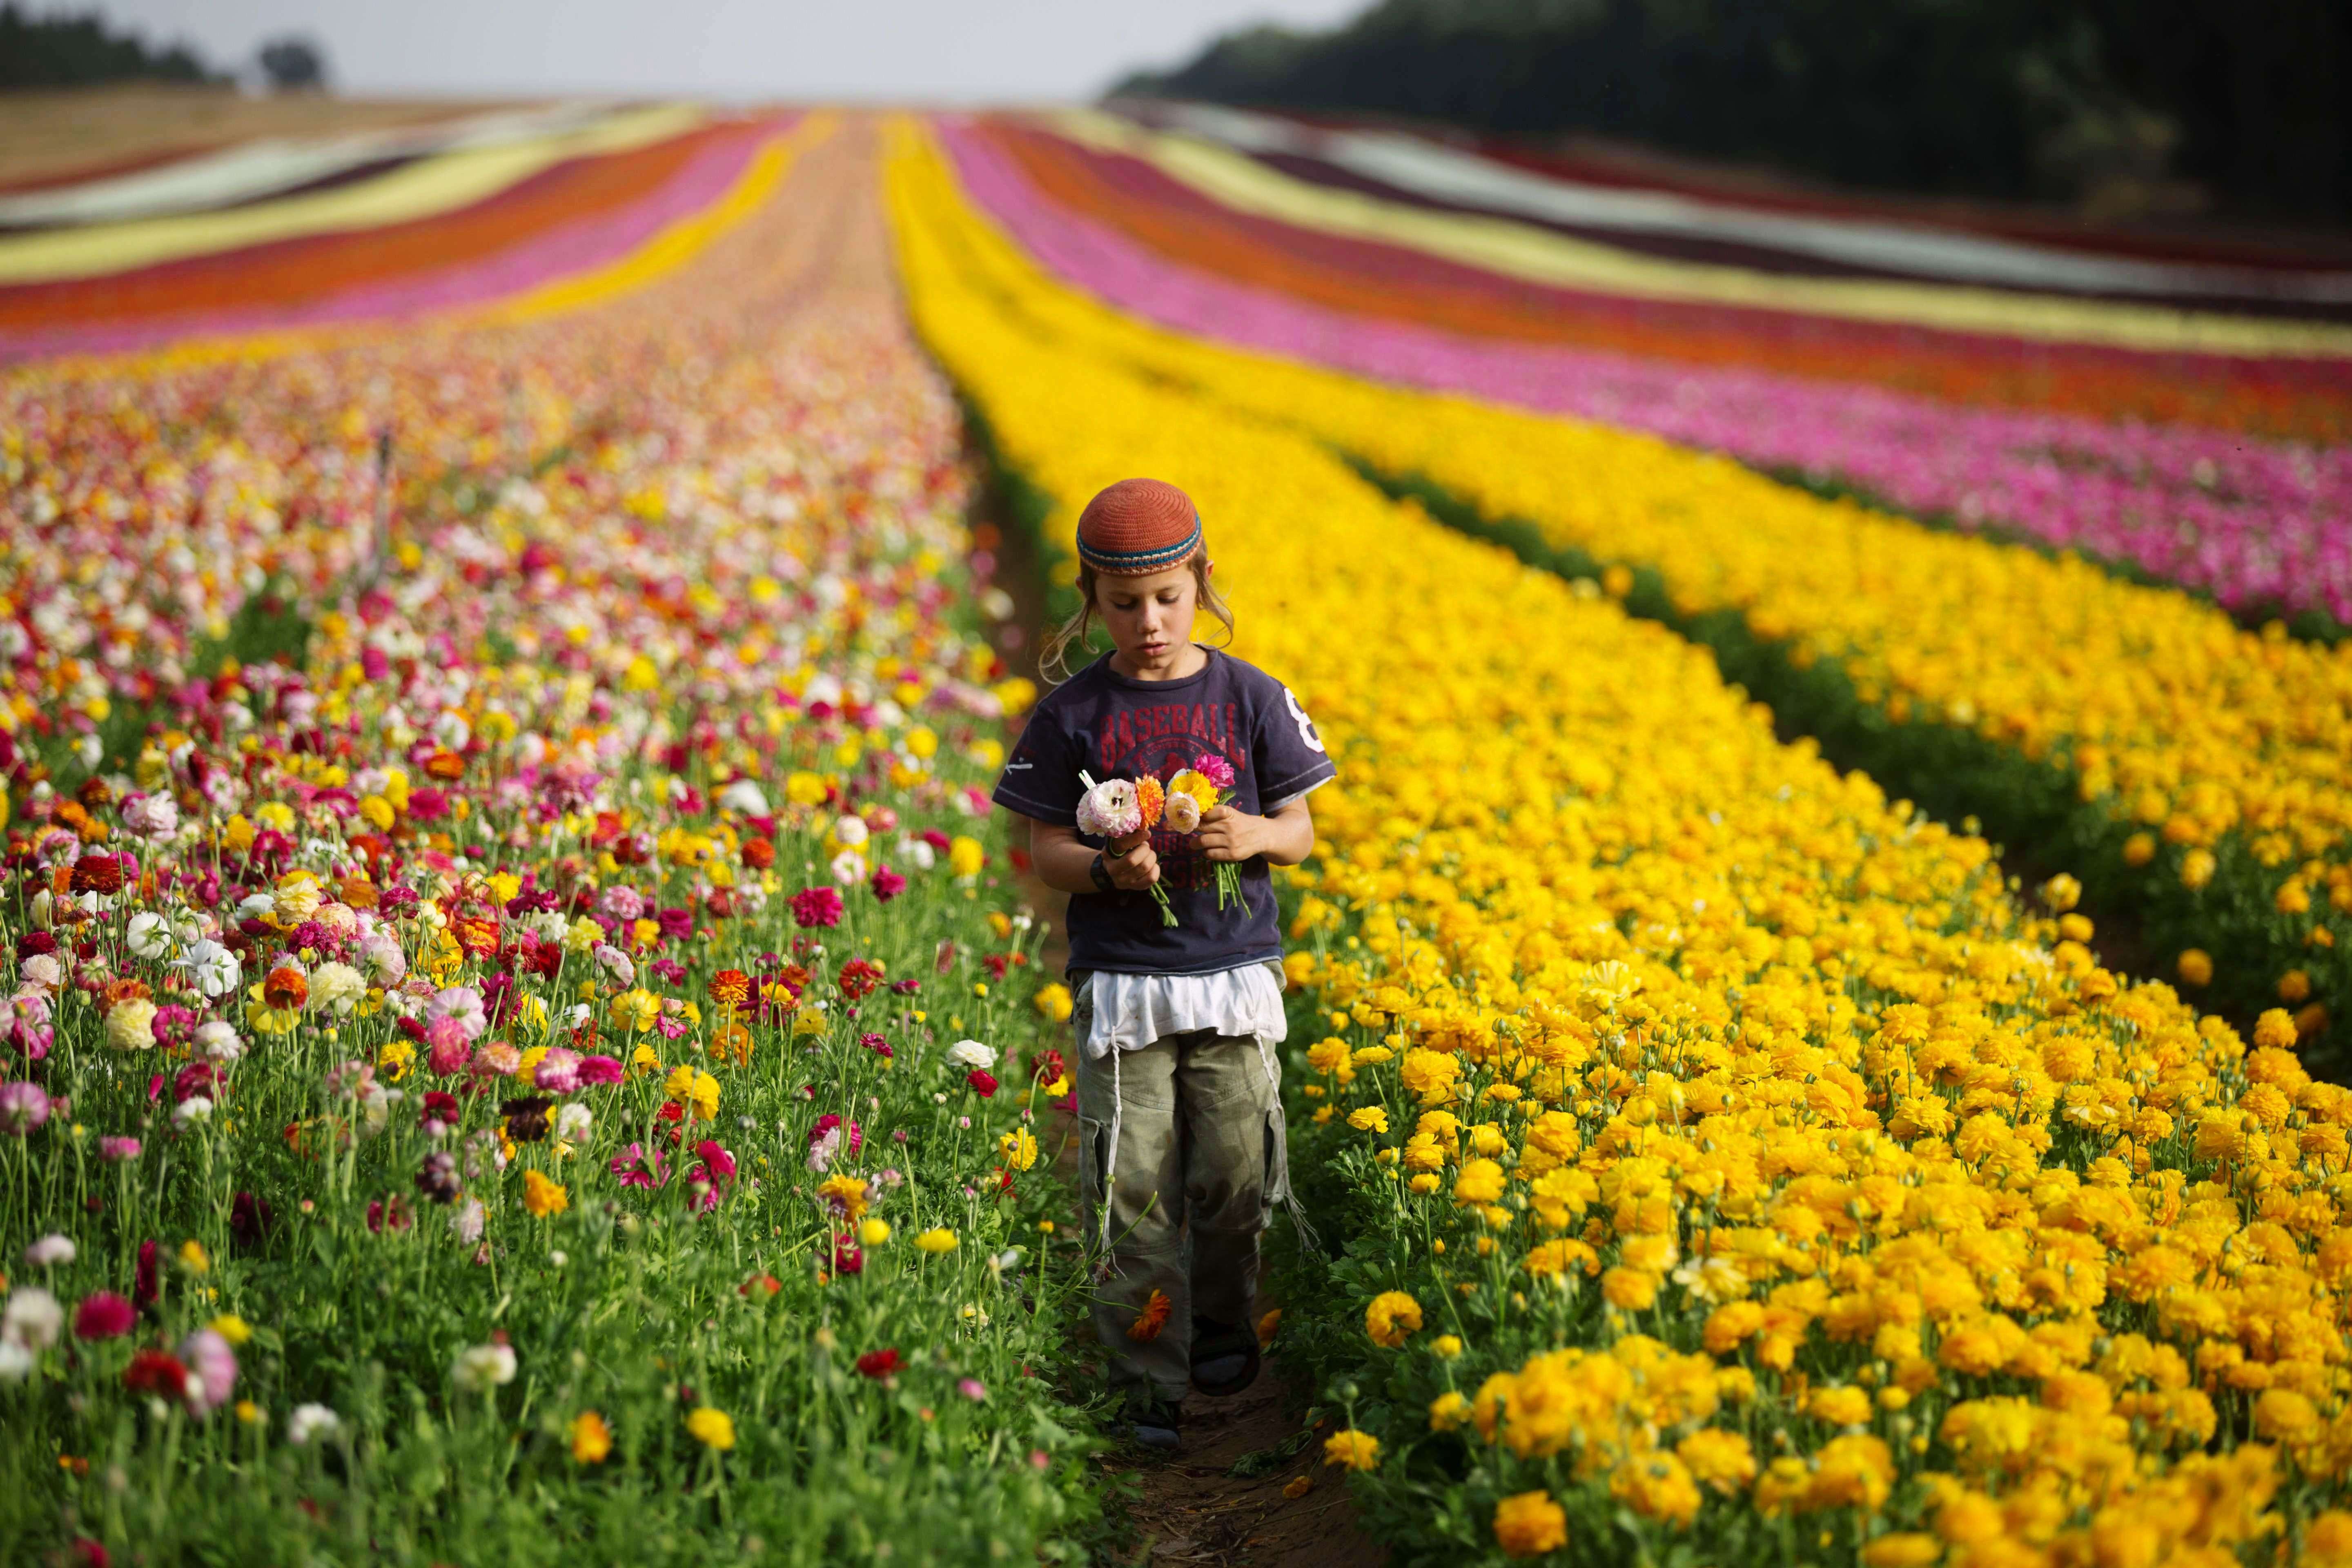 An Israeli boy picks Ranunculus flowers in a cultivated field in the southern Israeli Kibbutz of Nir Yitzhak, located along the Israeli-Gaza Strip border. The flower bulbs will be mostly exported to Europe. (AFP PHOTO/MENAHEM KAHANA)